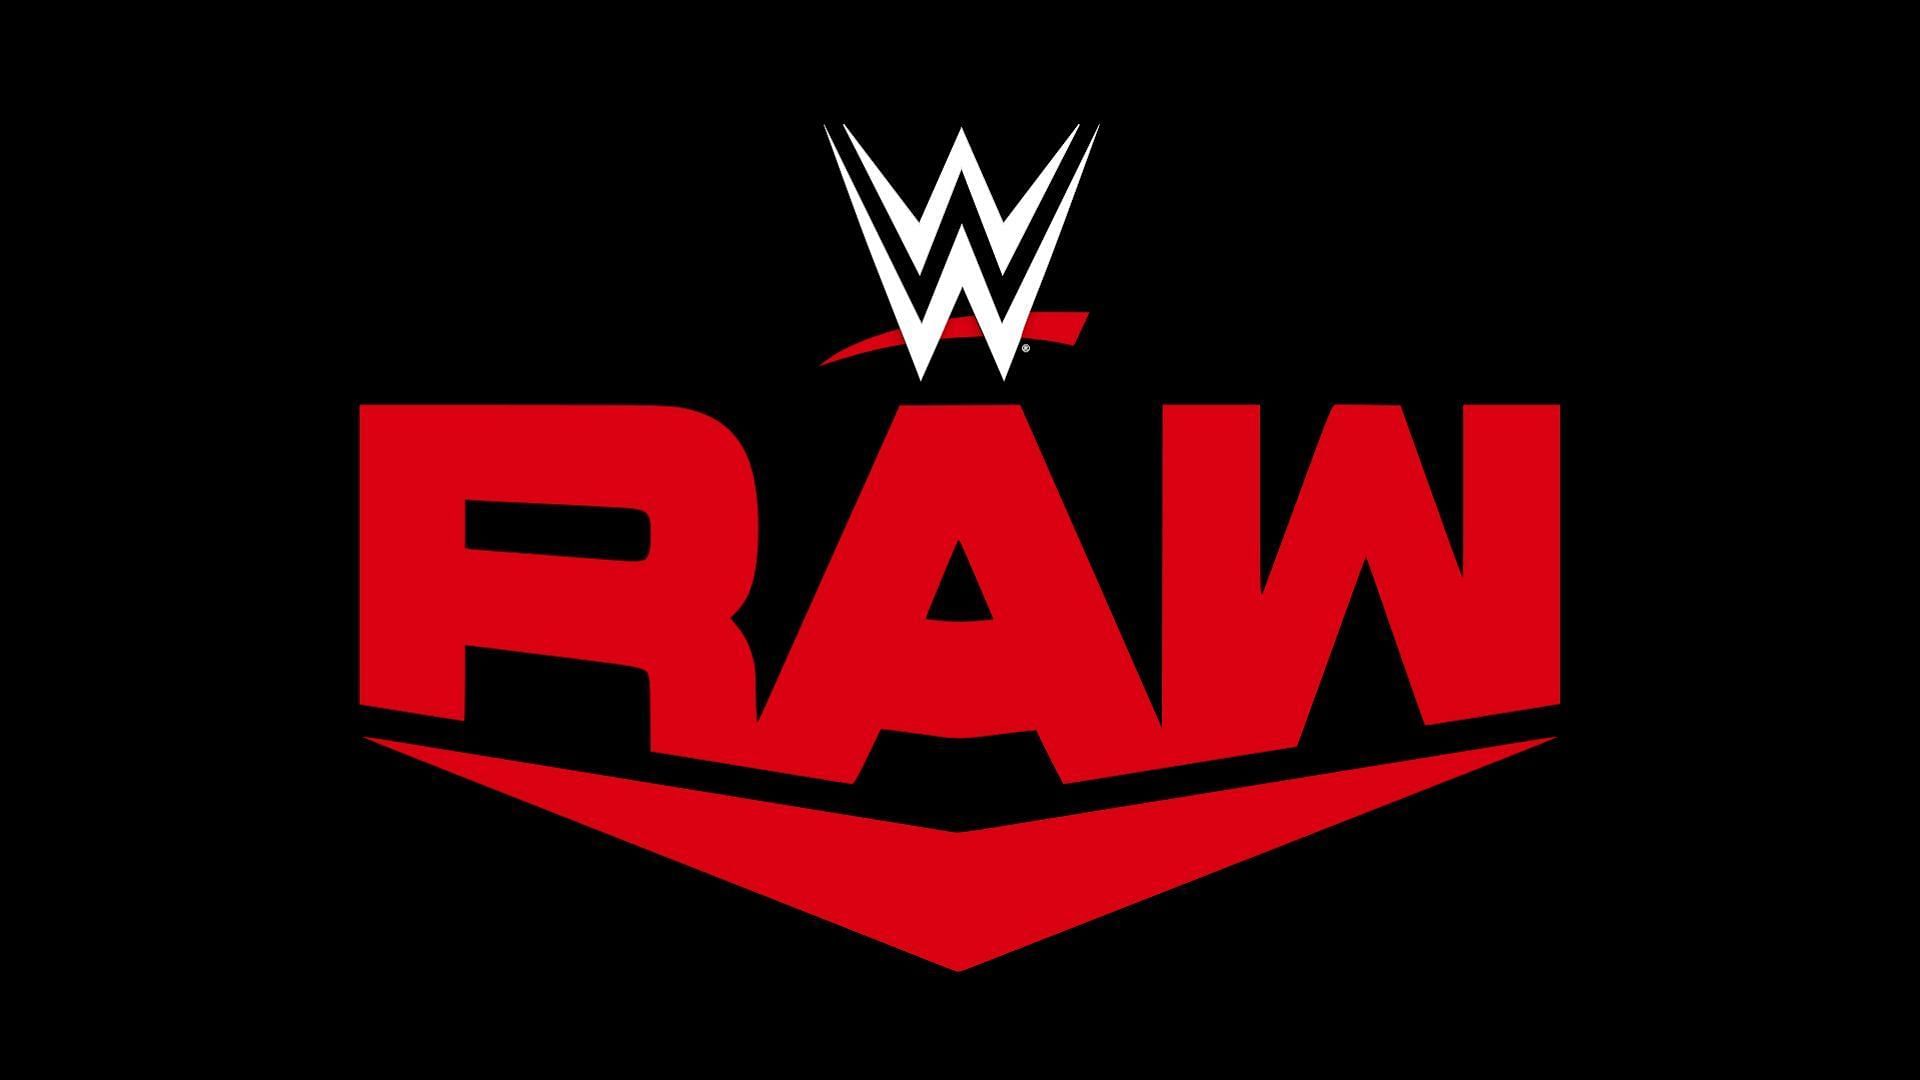 WWE Monday Night RAW could feature a  team split soon